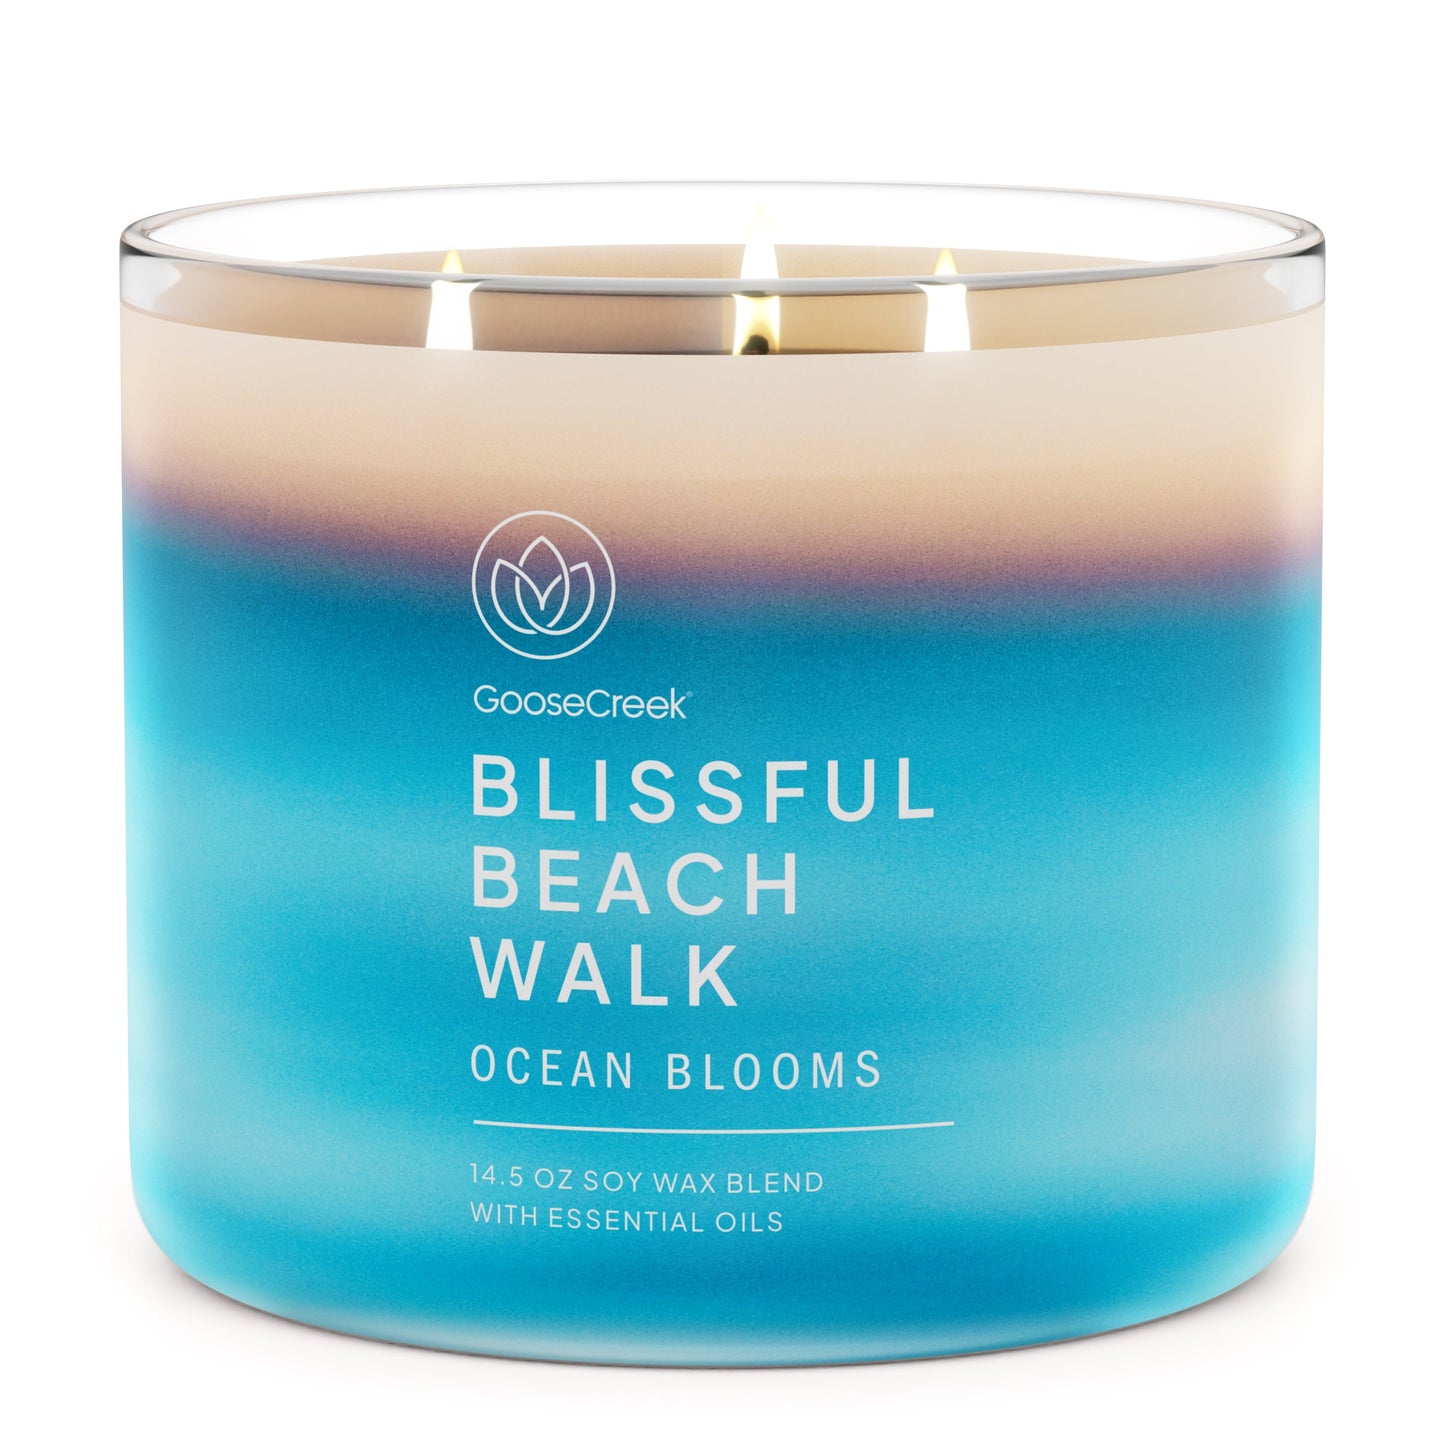 Ocean Blooms Large 3-Wick Candle